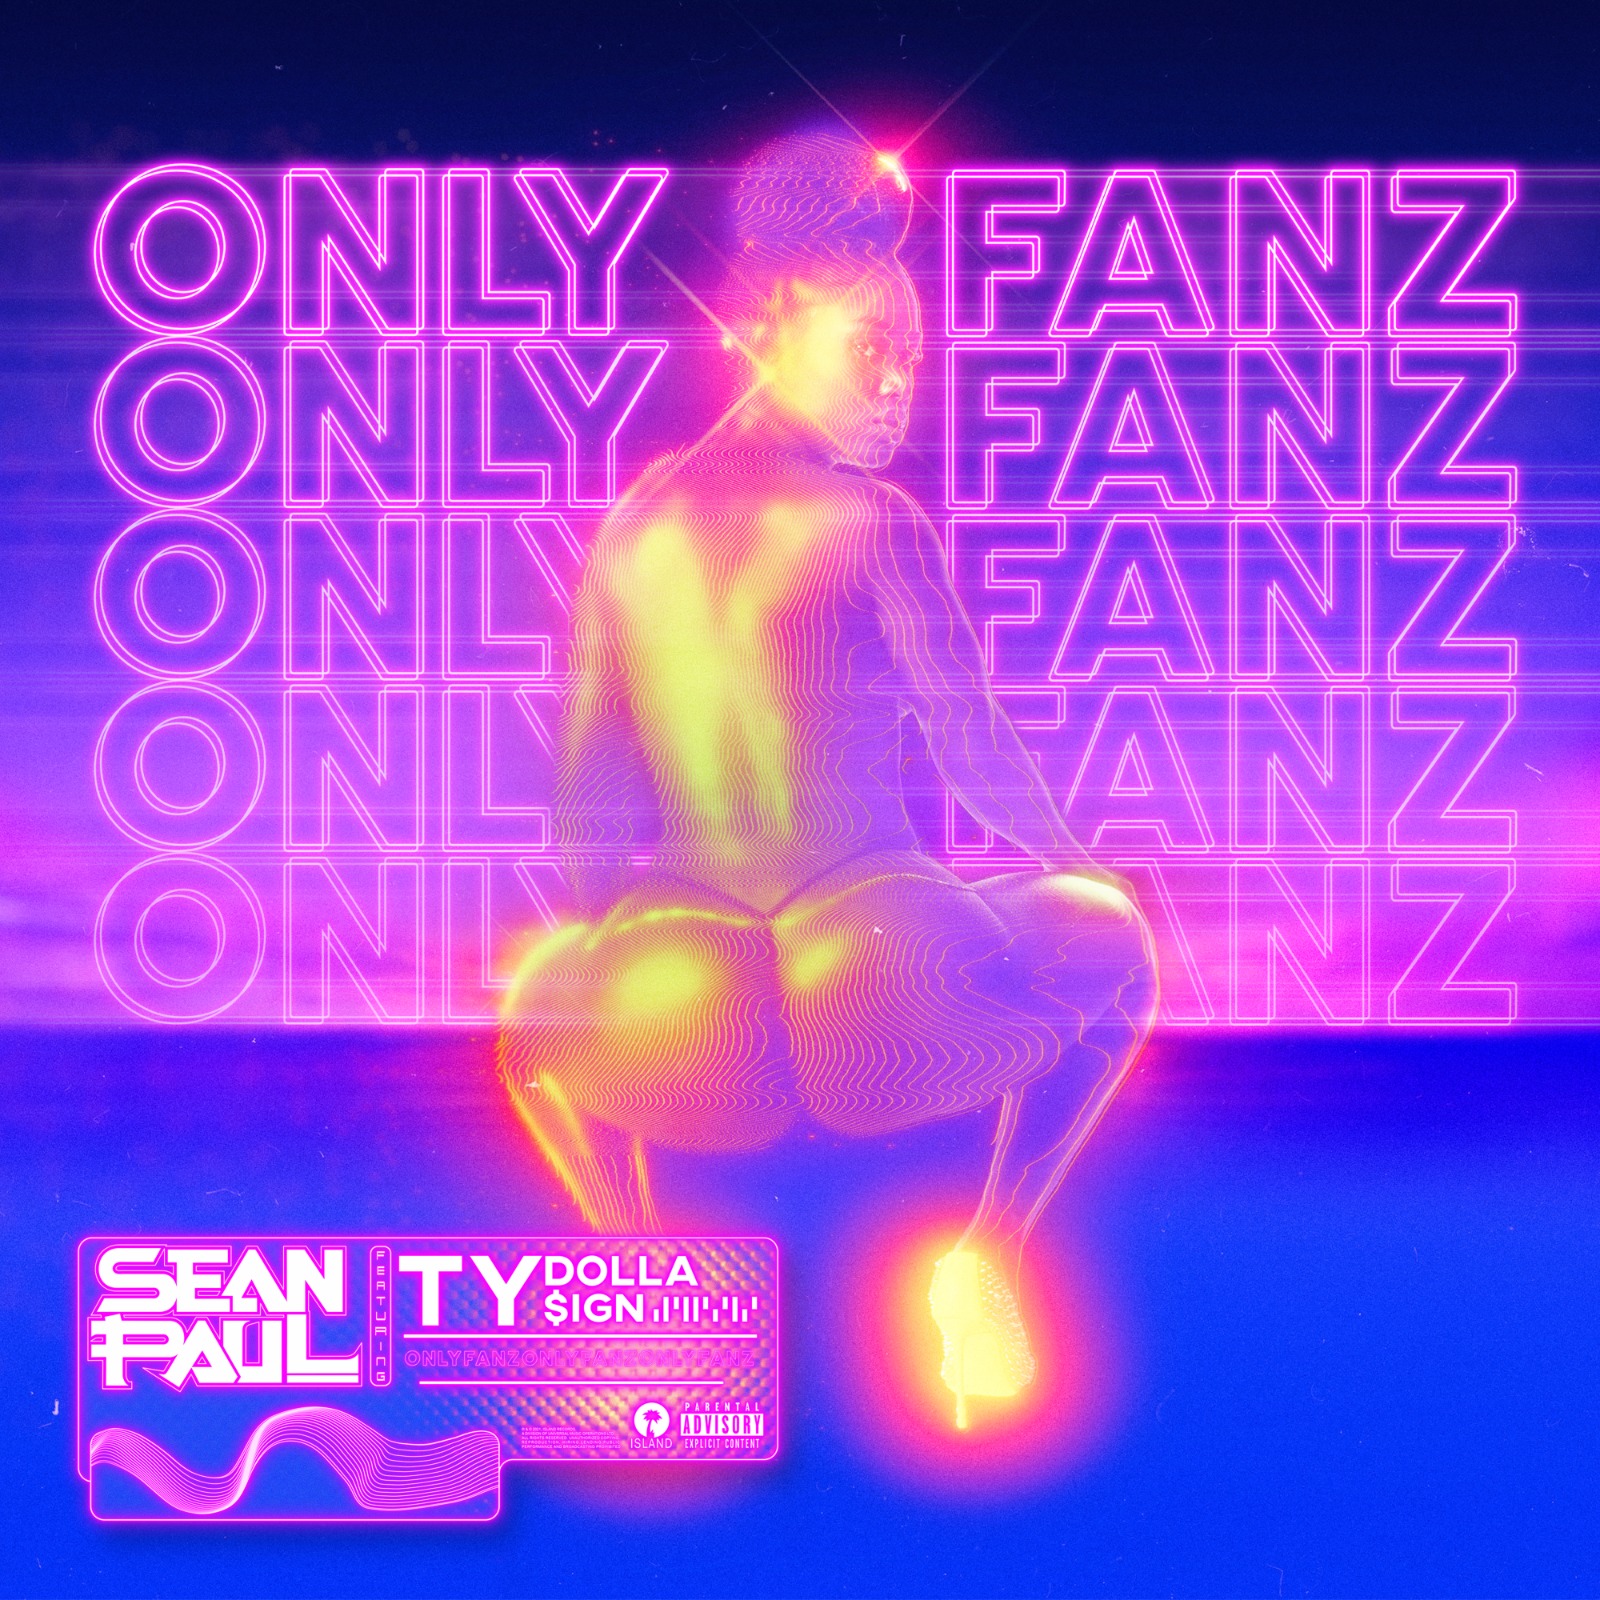 sean paul - only fanz feat. ty dolla sign